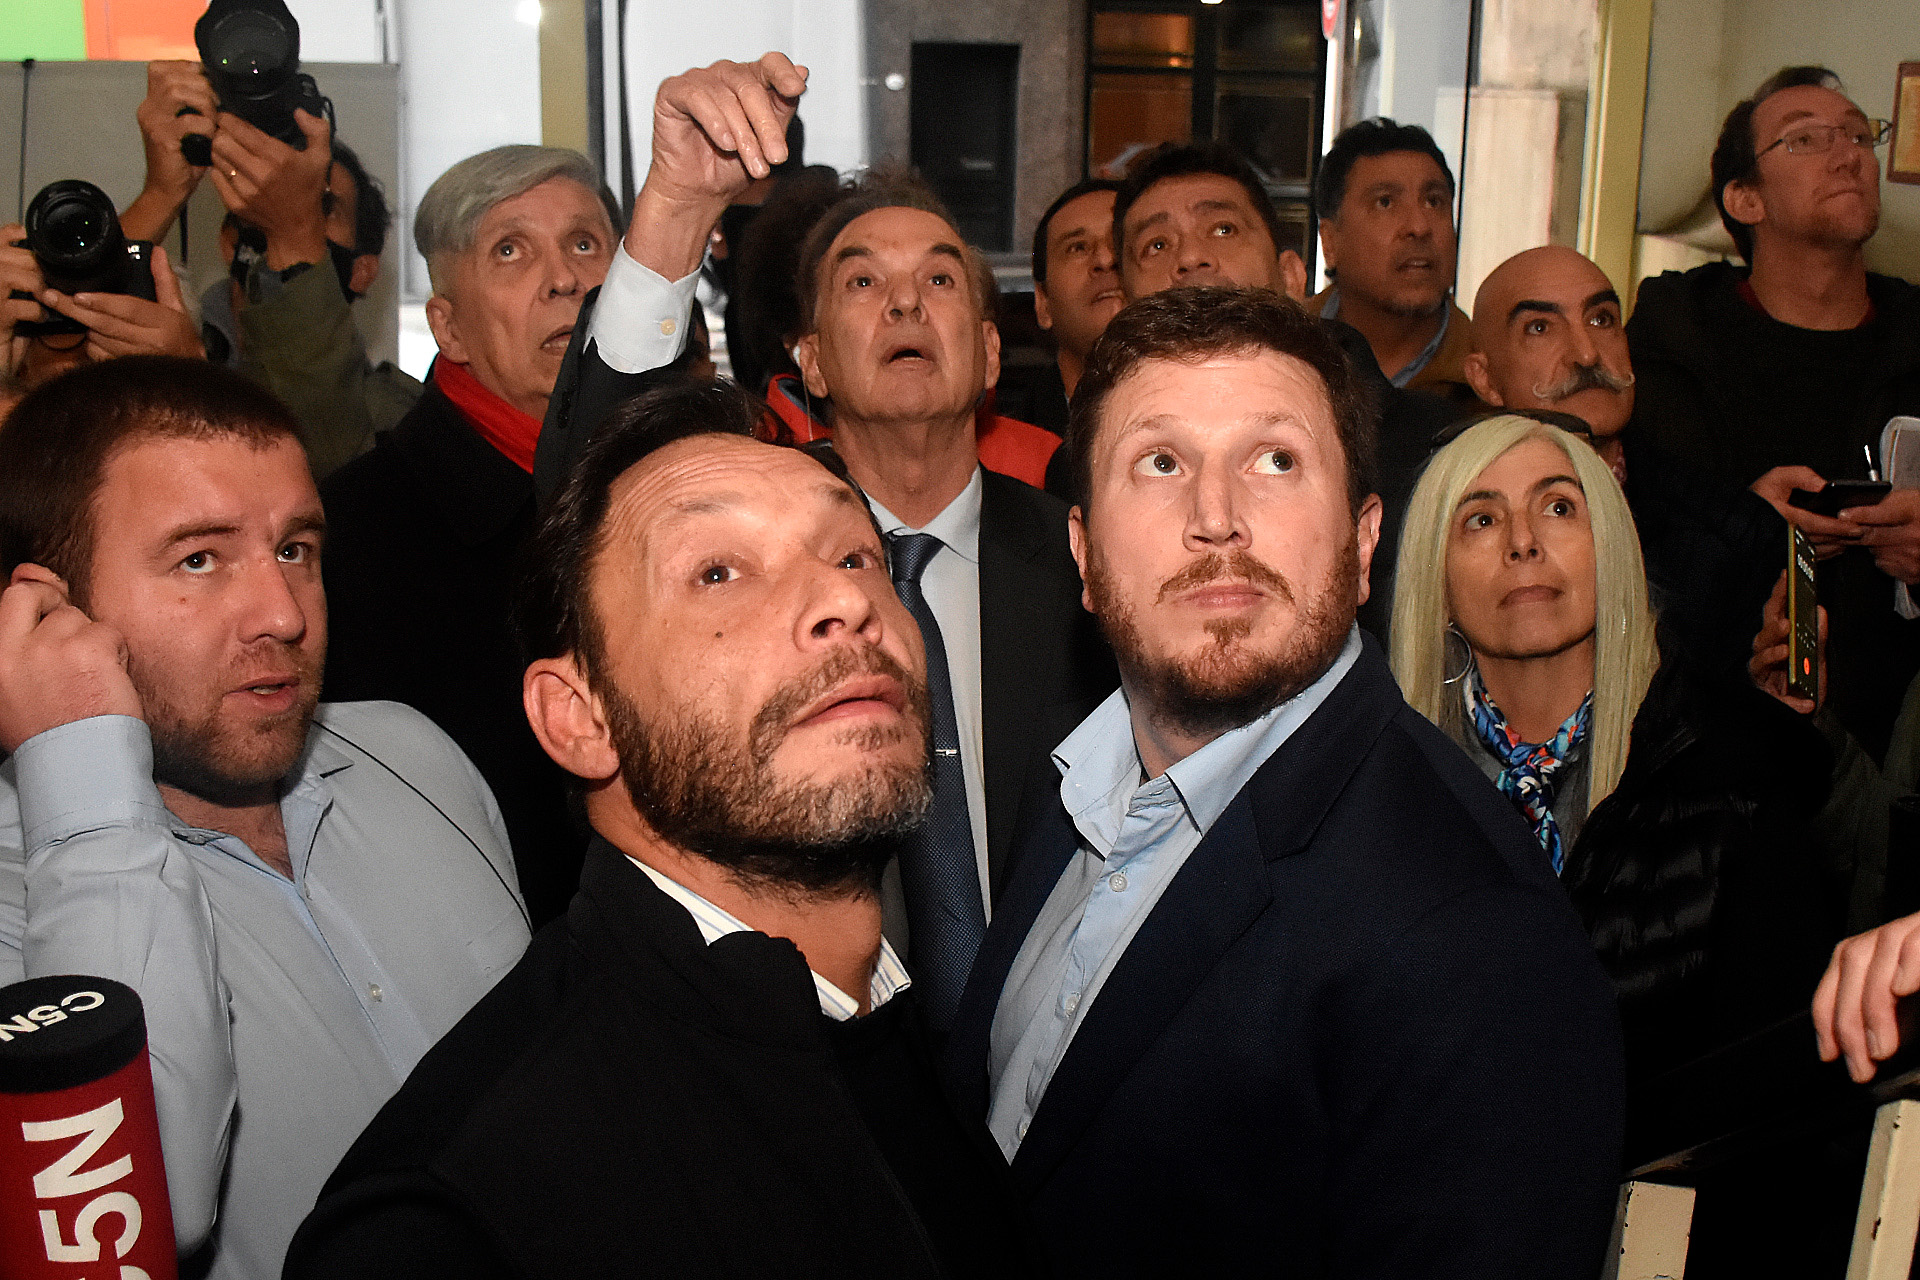 Federico Angelini, Maximiliano Ferraro and Miguel Angel Pichetto listen to Gerardo Morales, who, from the stairs, announces that he will speak alone before the press (Photo: Nicolás Stulberg)